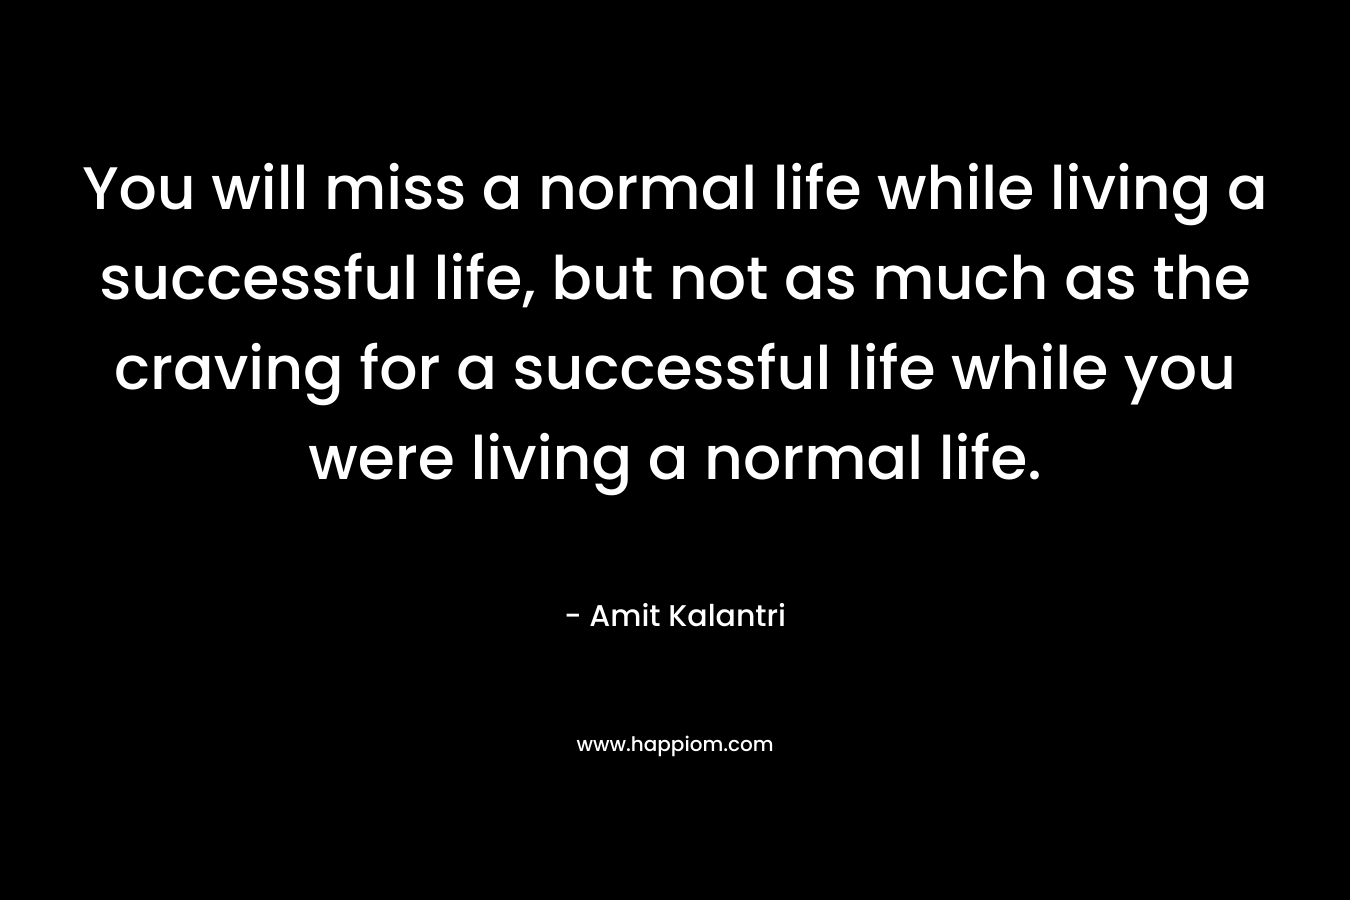 You will miss a normal life while living a successful life, but not as much as the craving for a successful life while you were living a normal life.